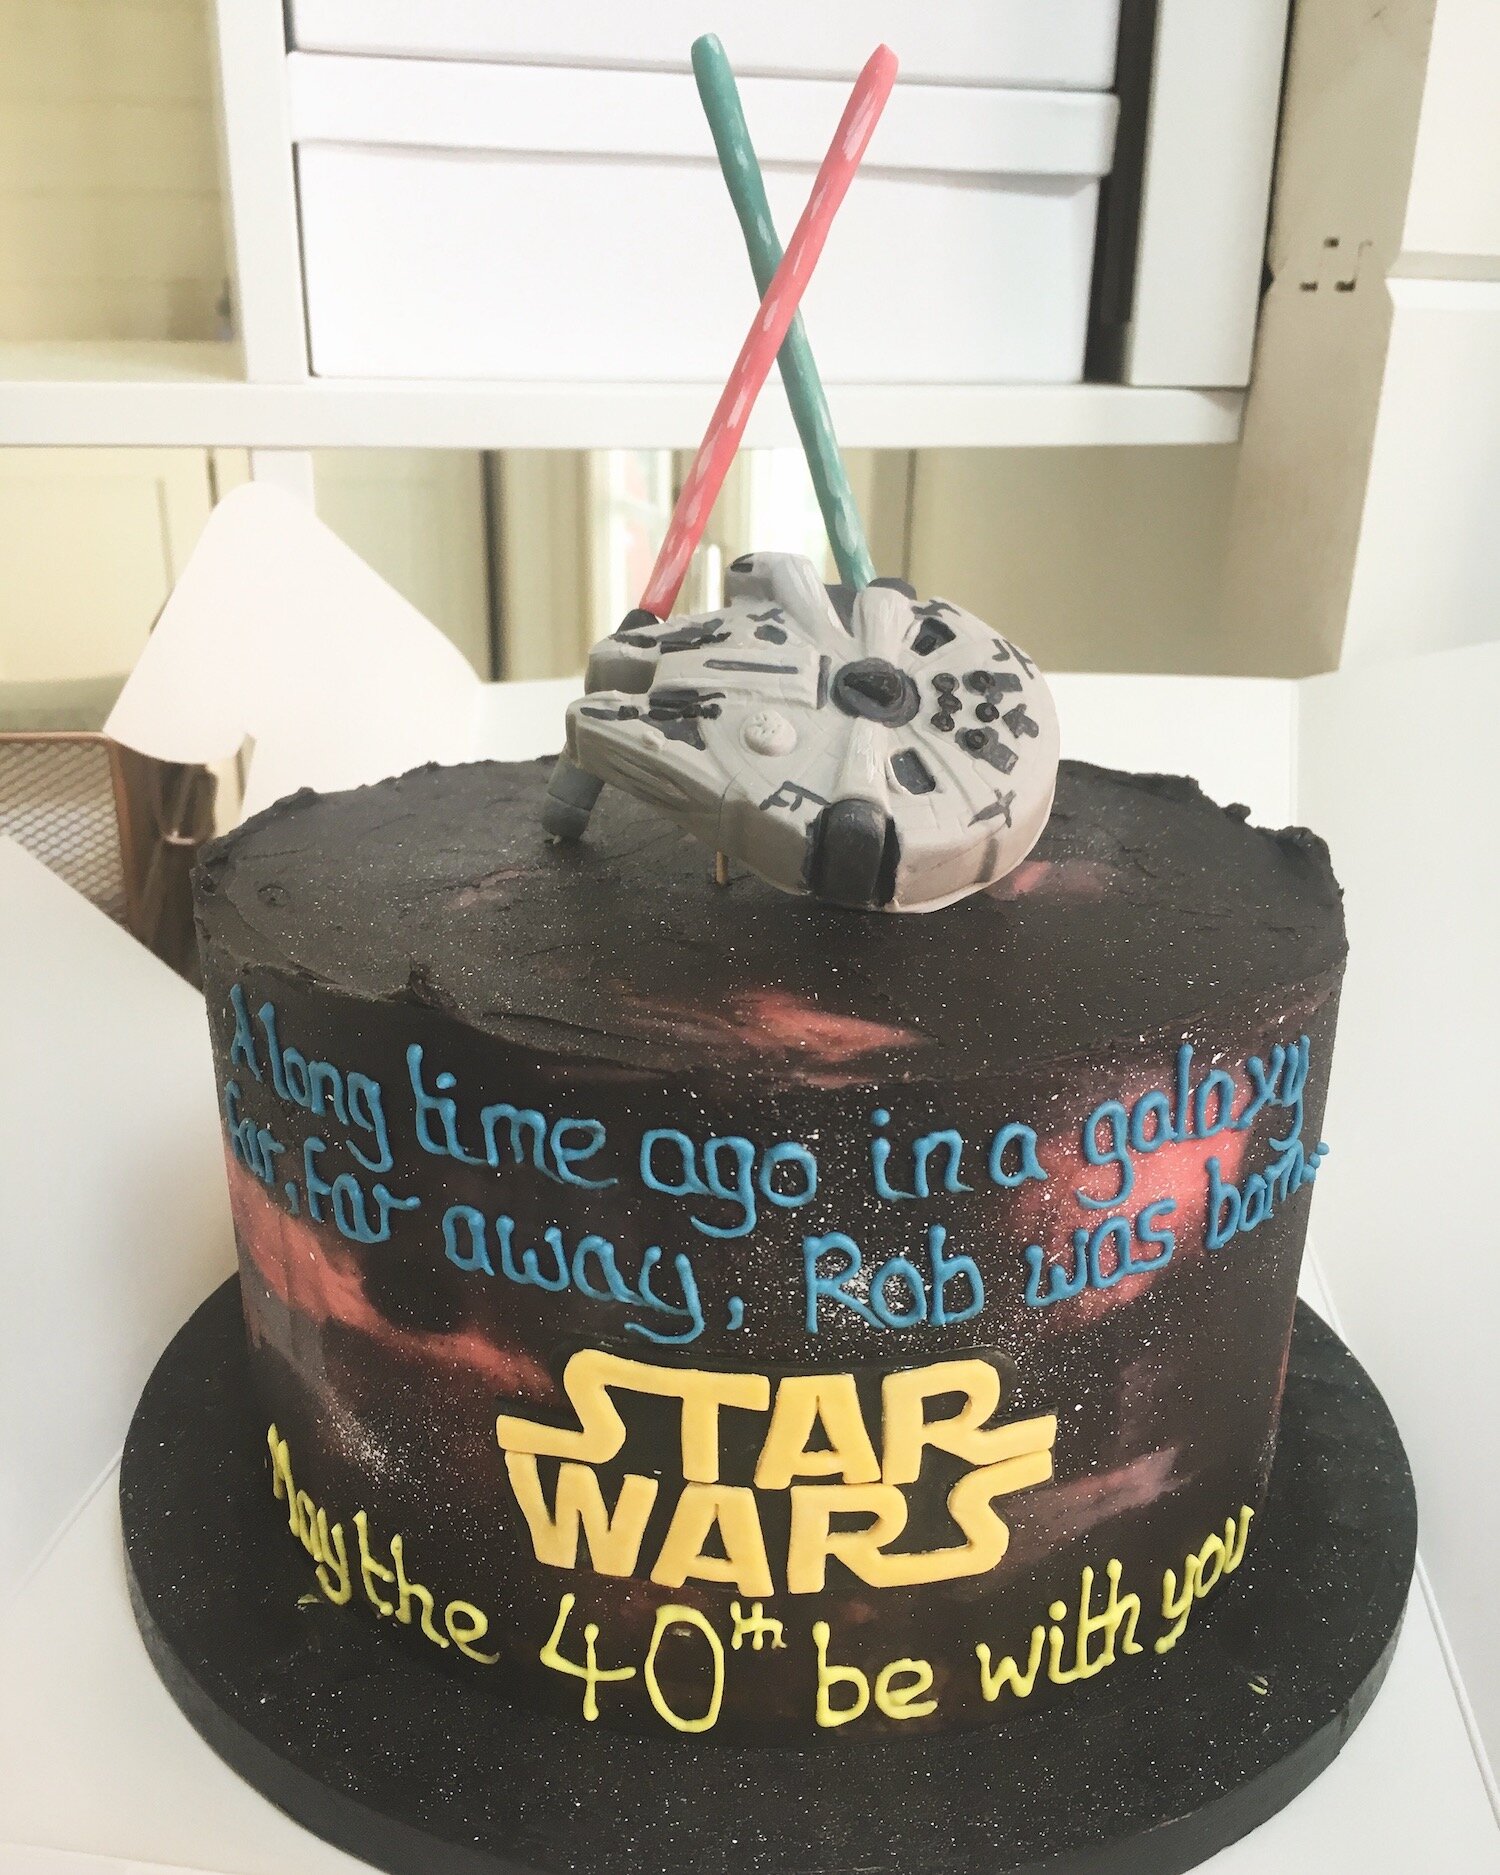 star wars — News from the Caked studio, Dorset — Caked.